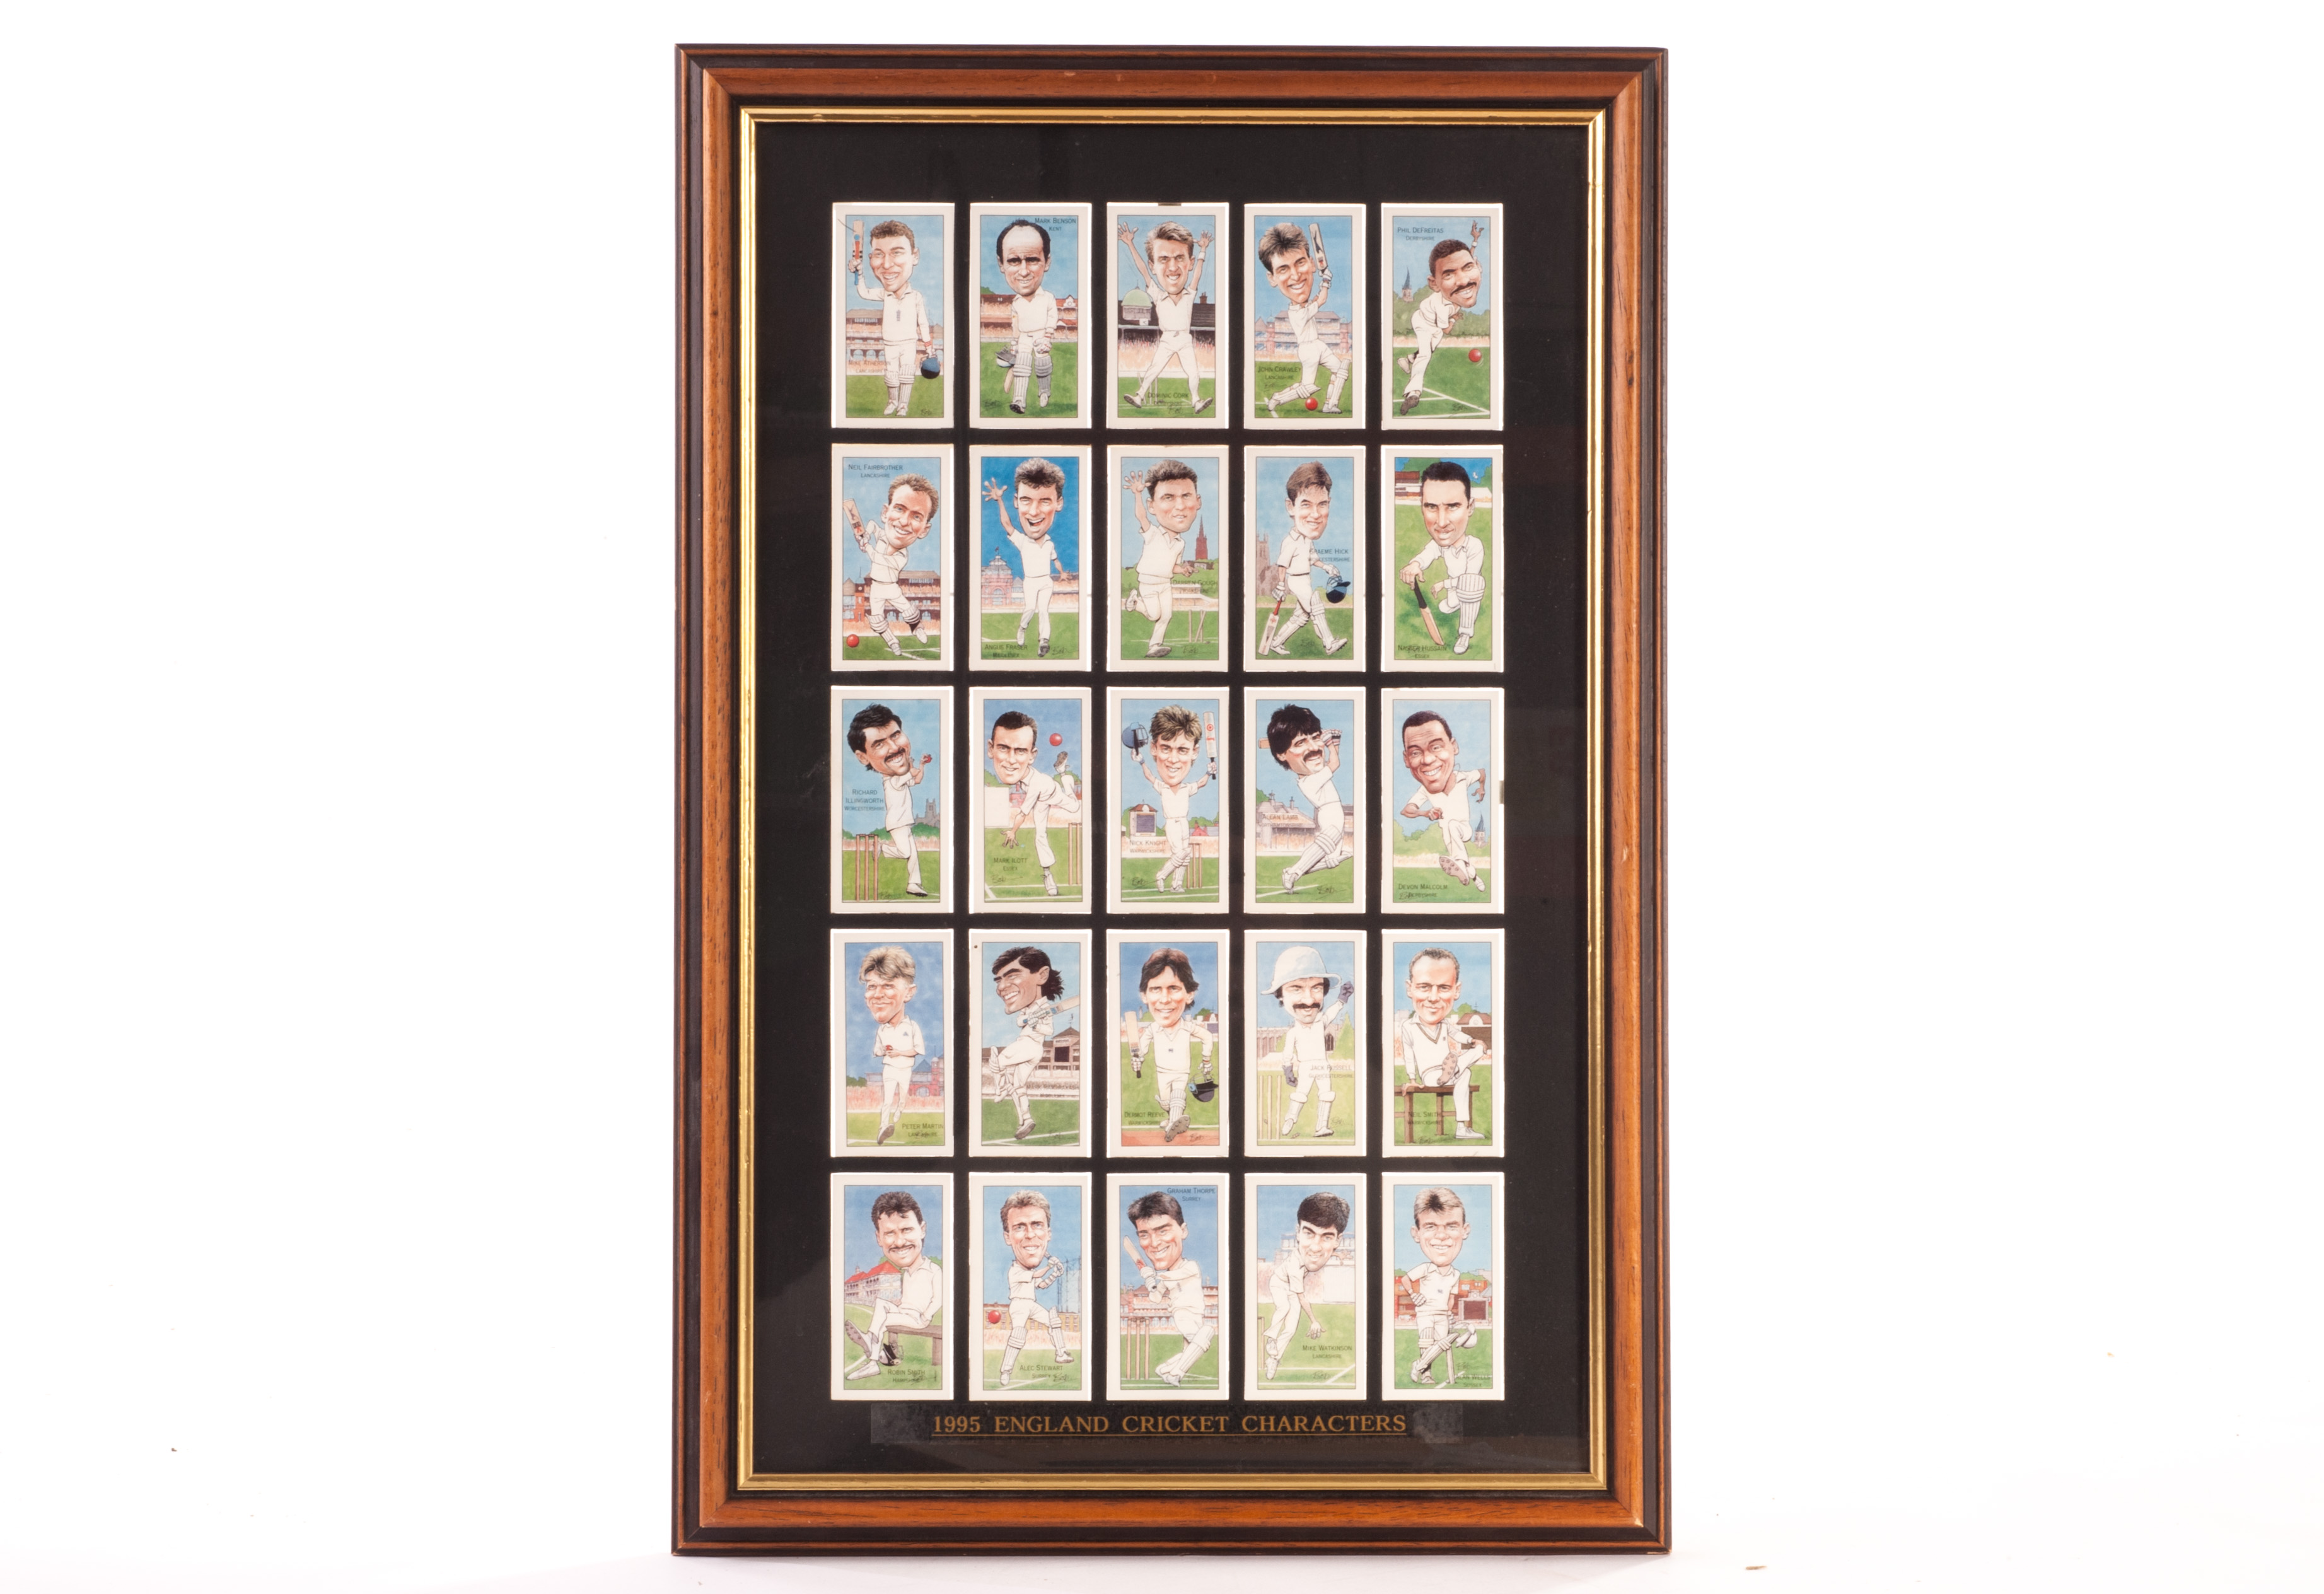 Trade Cards, Cricket, County Print, framed and glazed set of 25 1995 England Cricket Characters, (